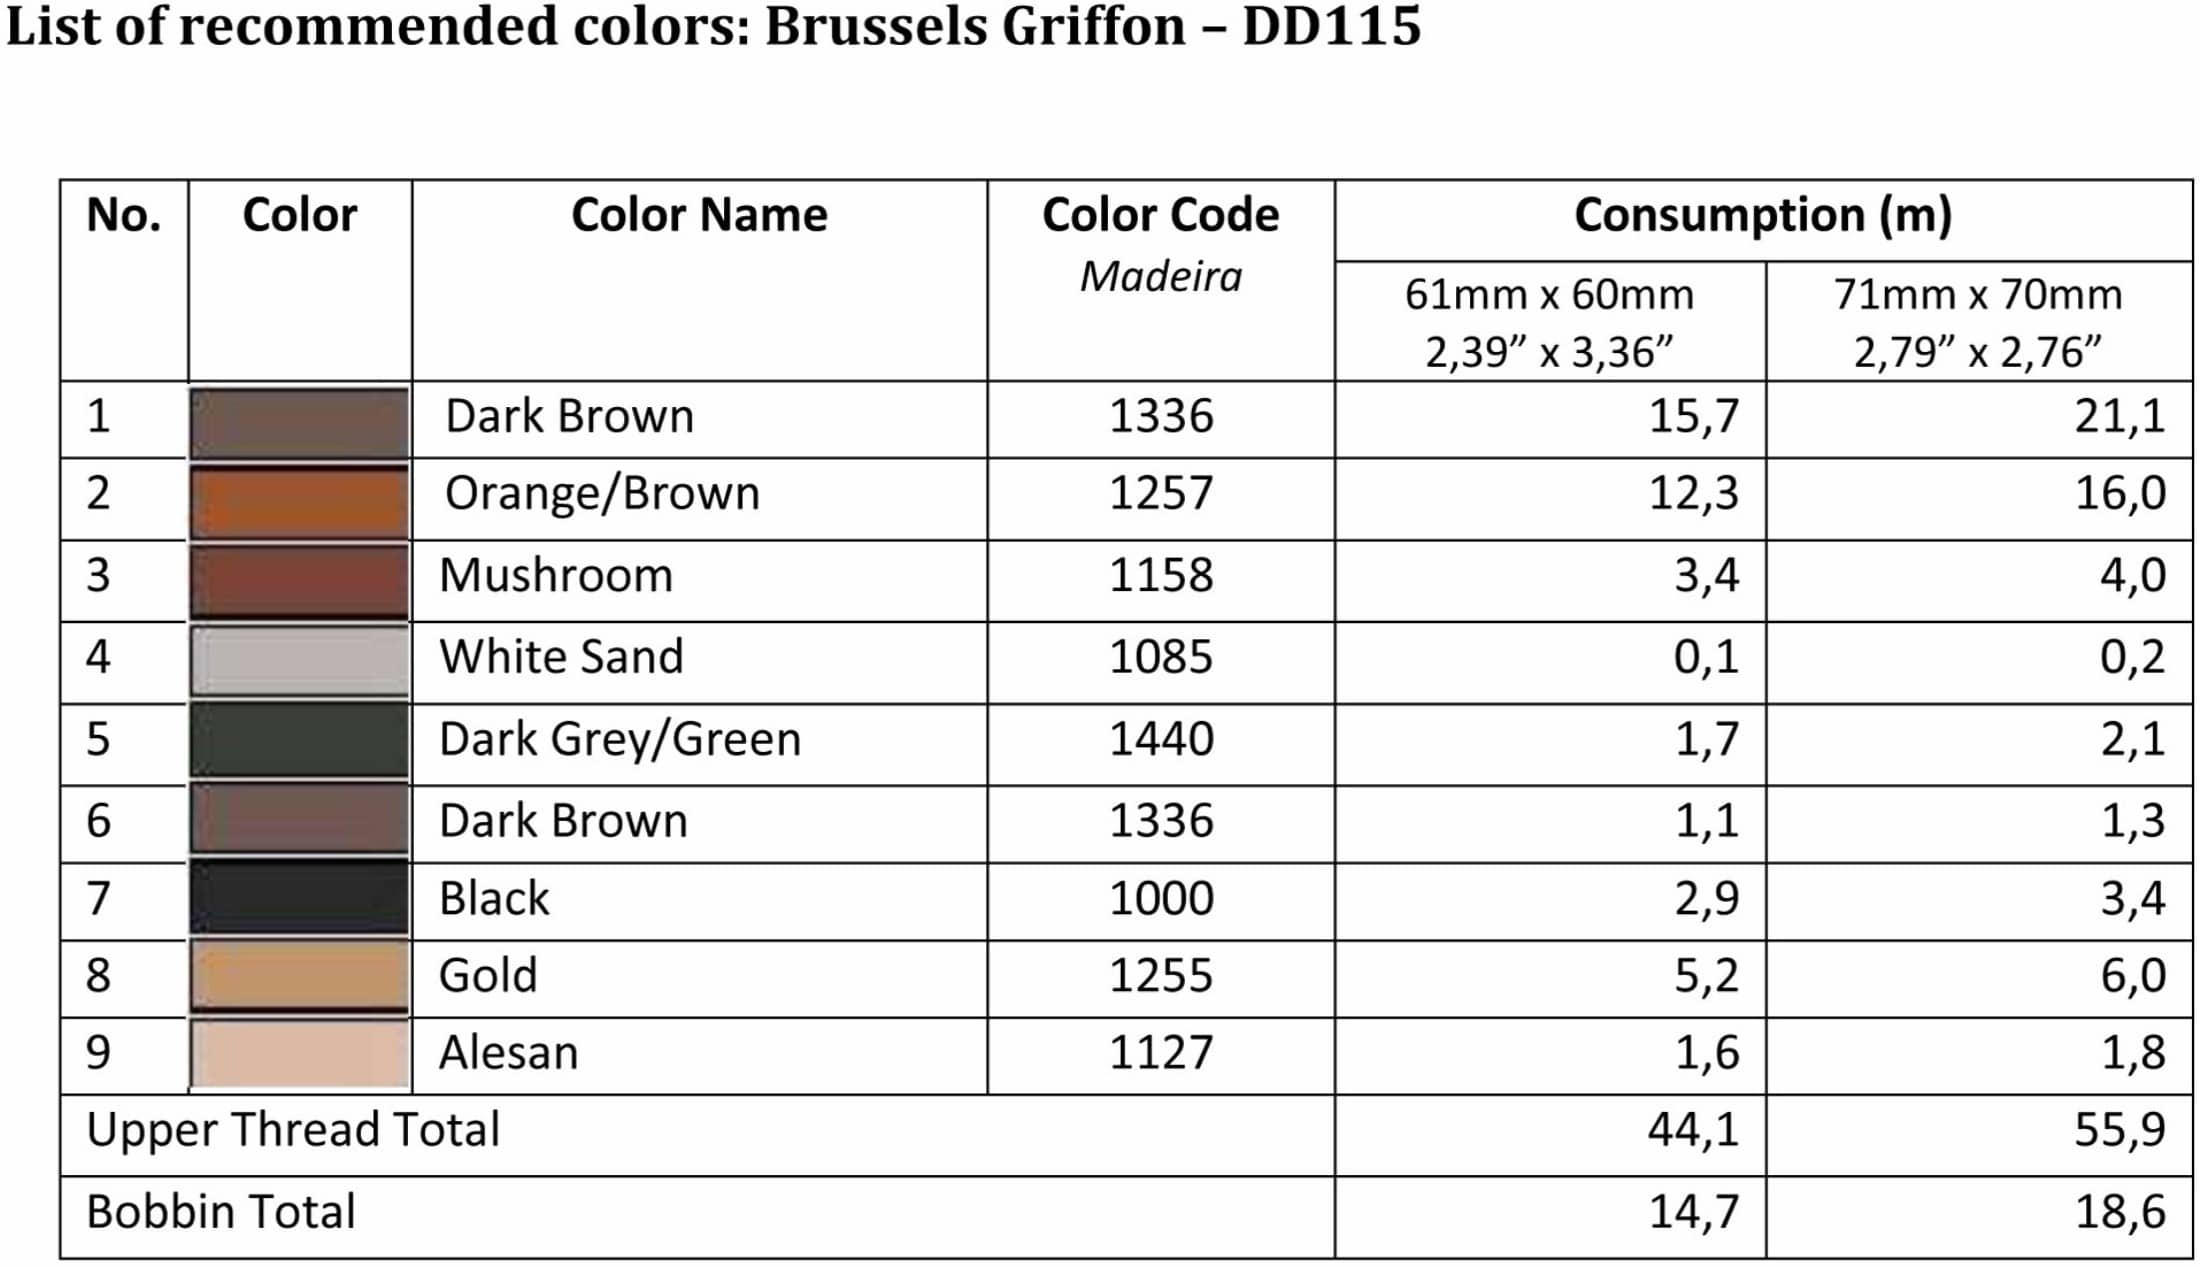 List of Recommended Colors - Brussels Griffon DD115